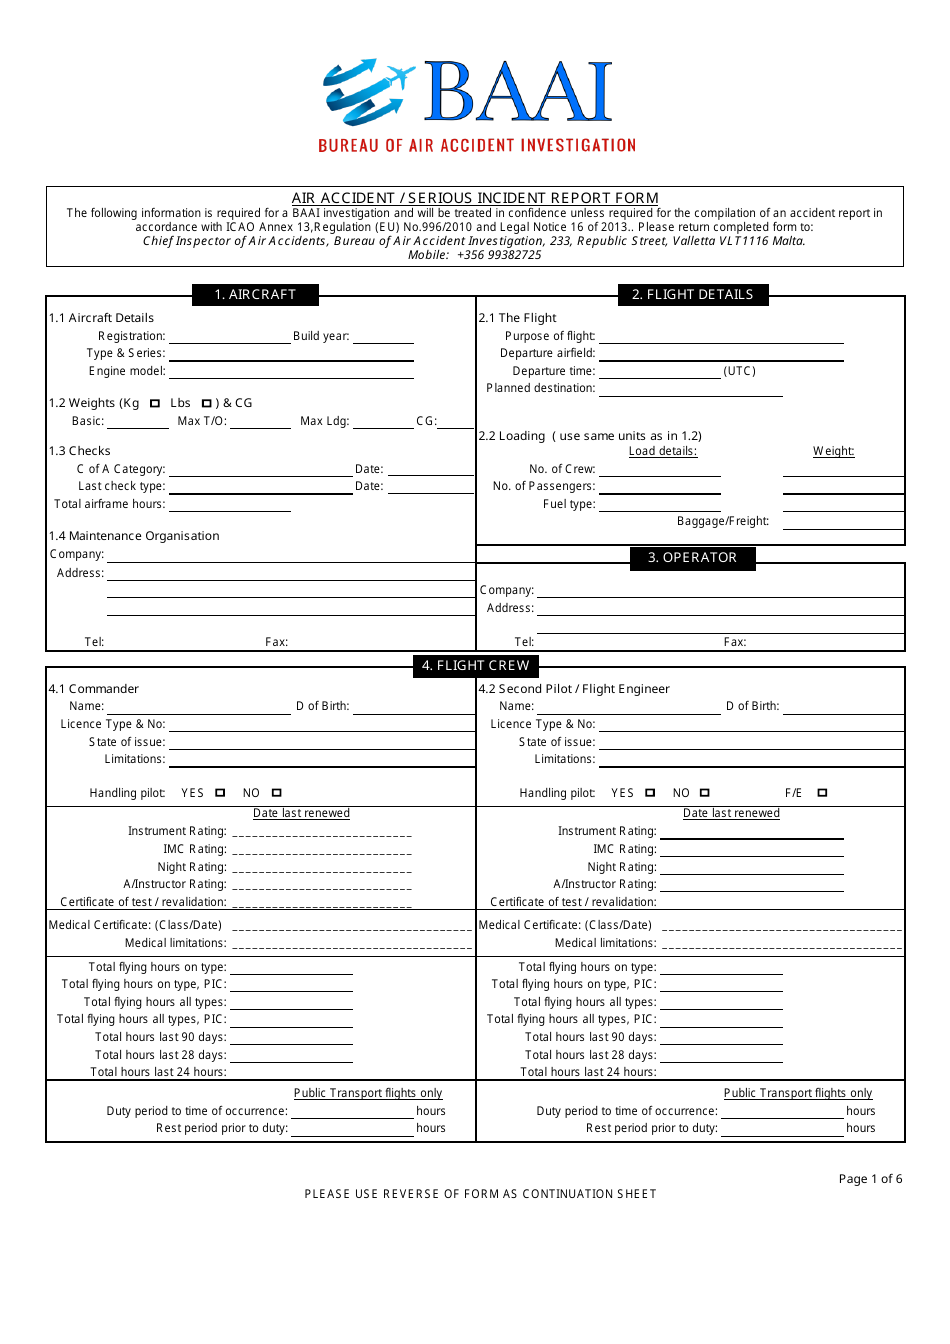 Air Accident / Serious Incident Report Form - Bureau of Air Accident Investigation - Valletta, Malta, Page 1